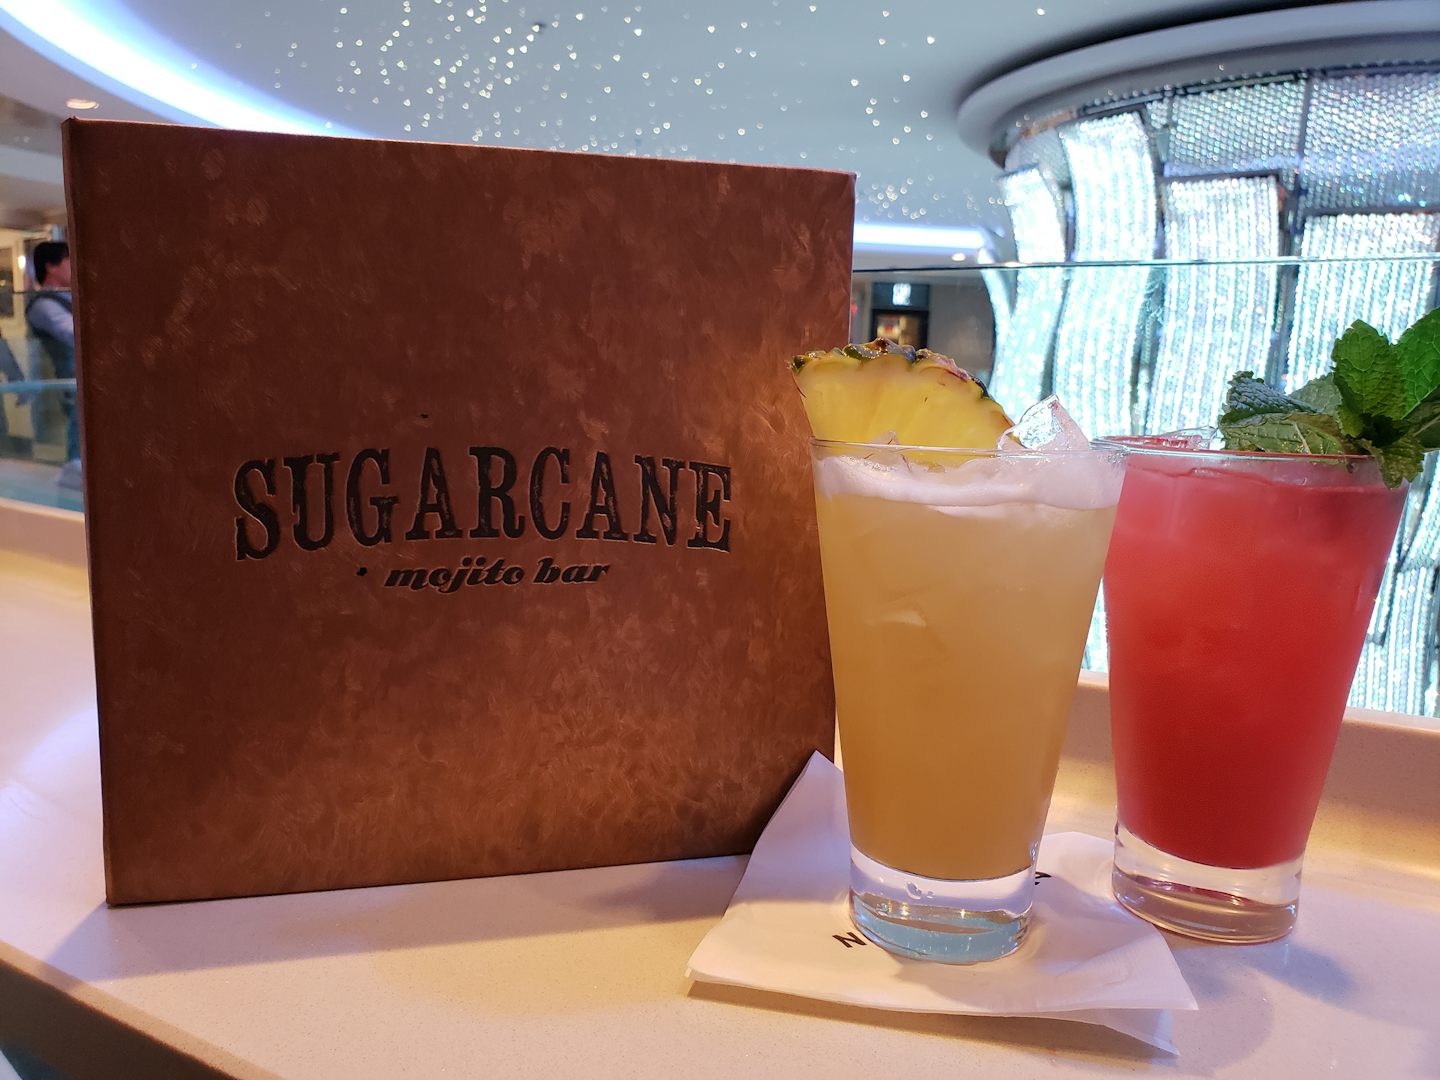 Sugarcane was a great spot for before dinner drinks and people watching